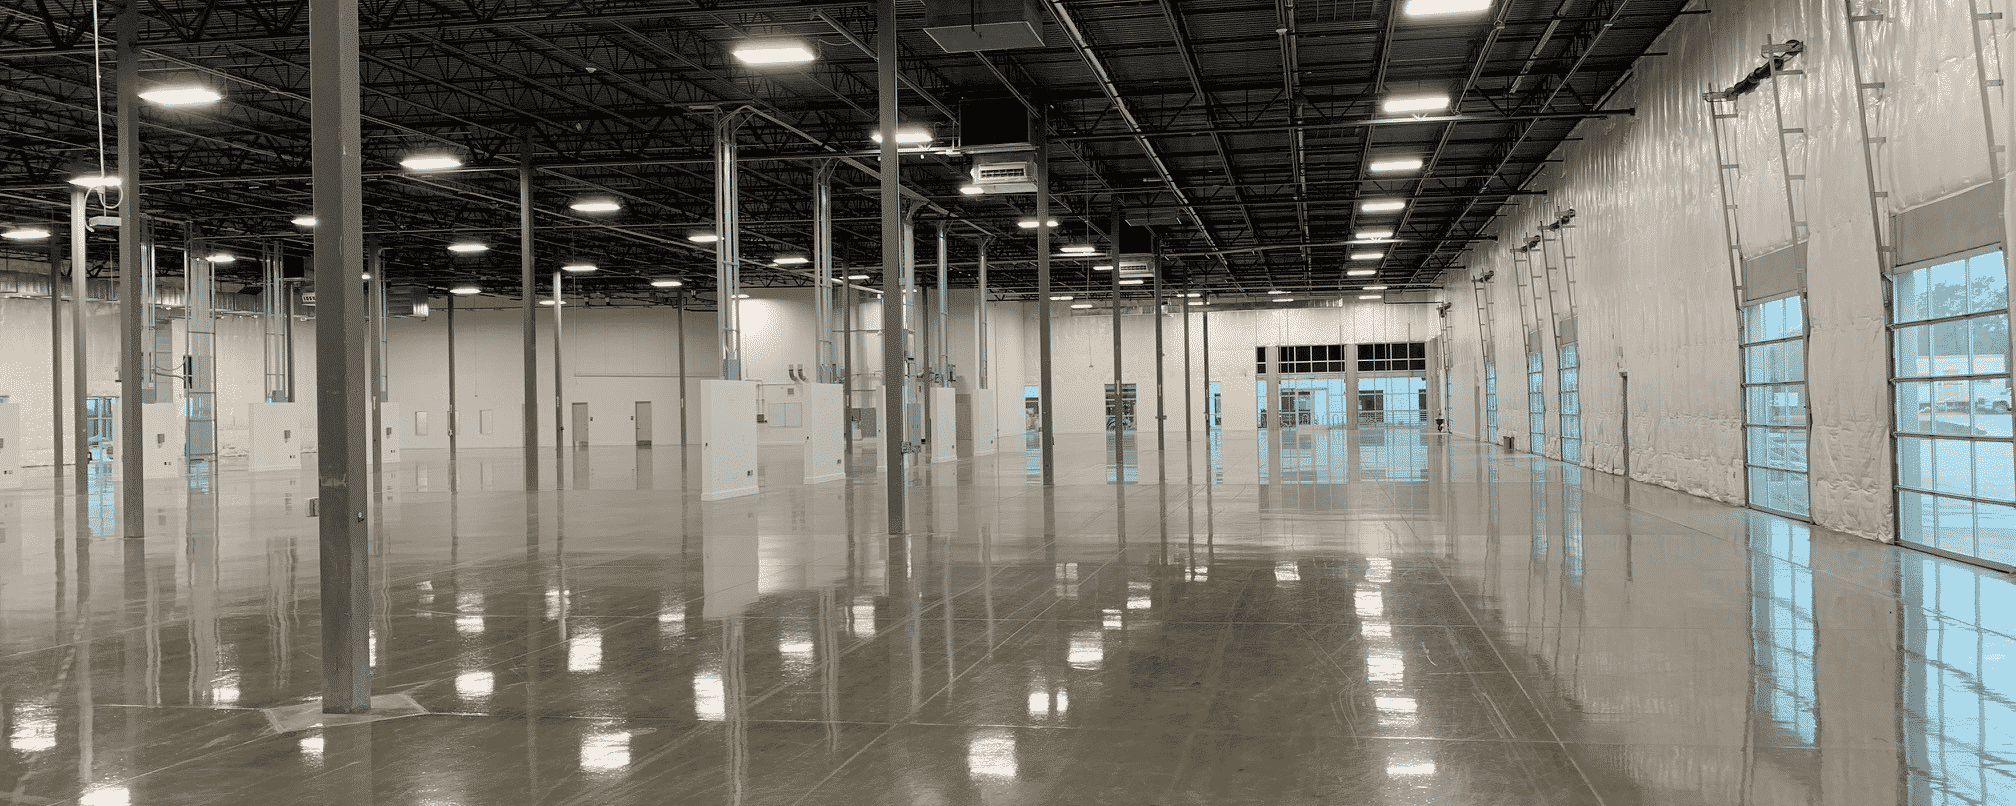 s Plan to Sublease Industrial Space May Just Be the Start